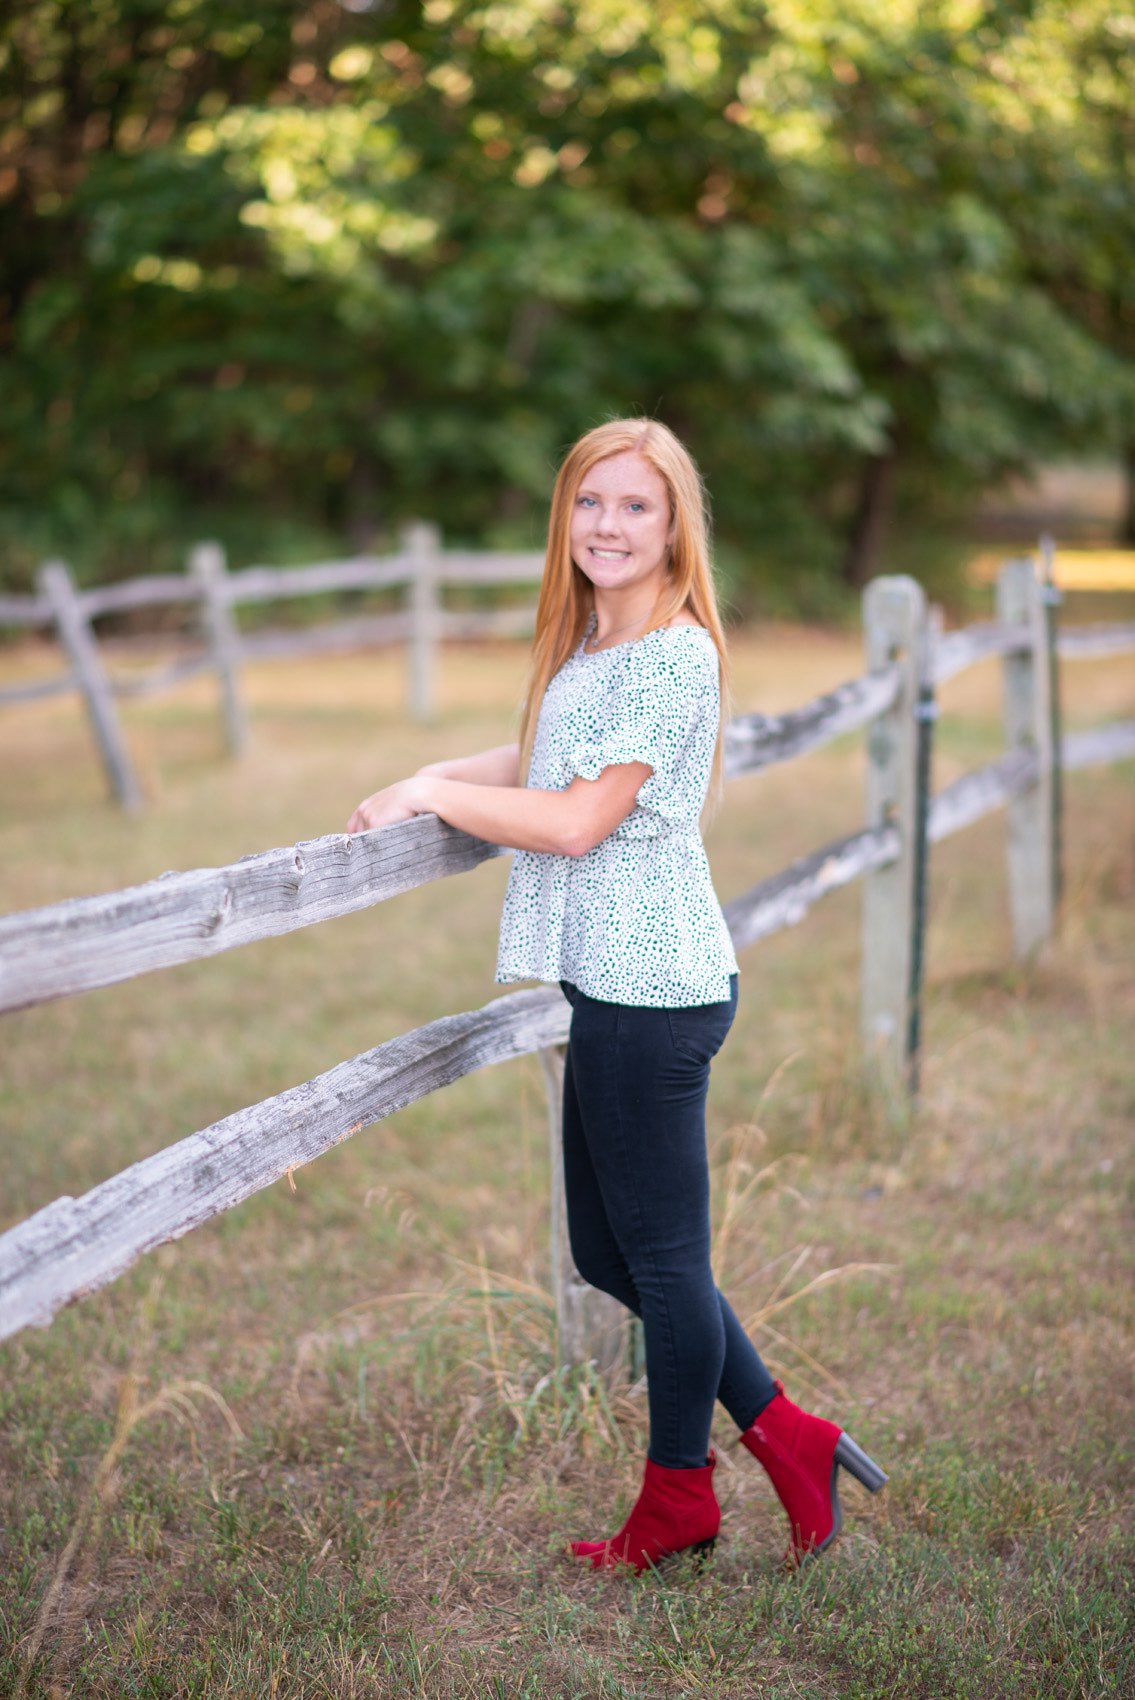 Senior girl in printed top and red boots standing next to a split rail fence in Reeds Spring.